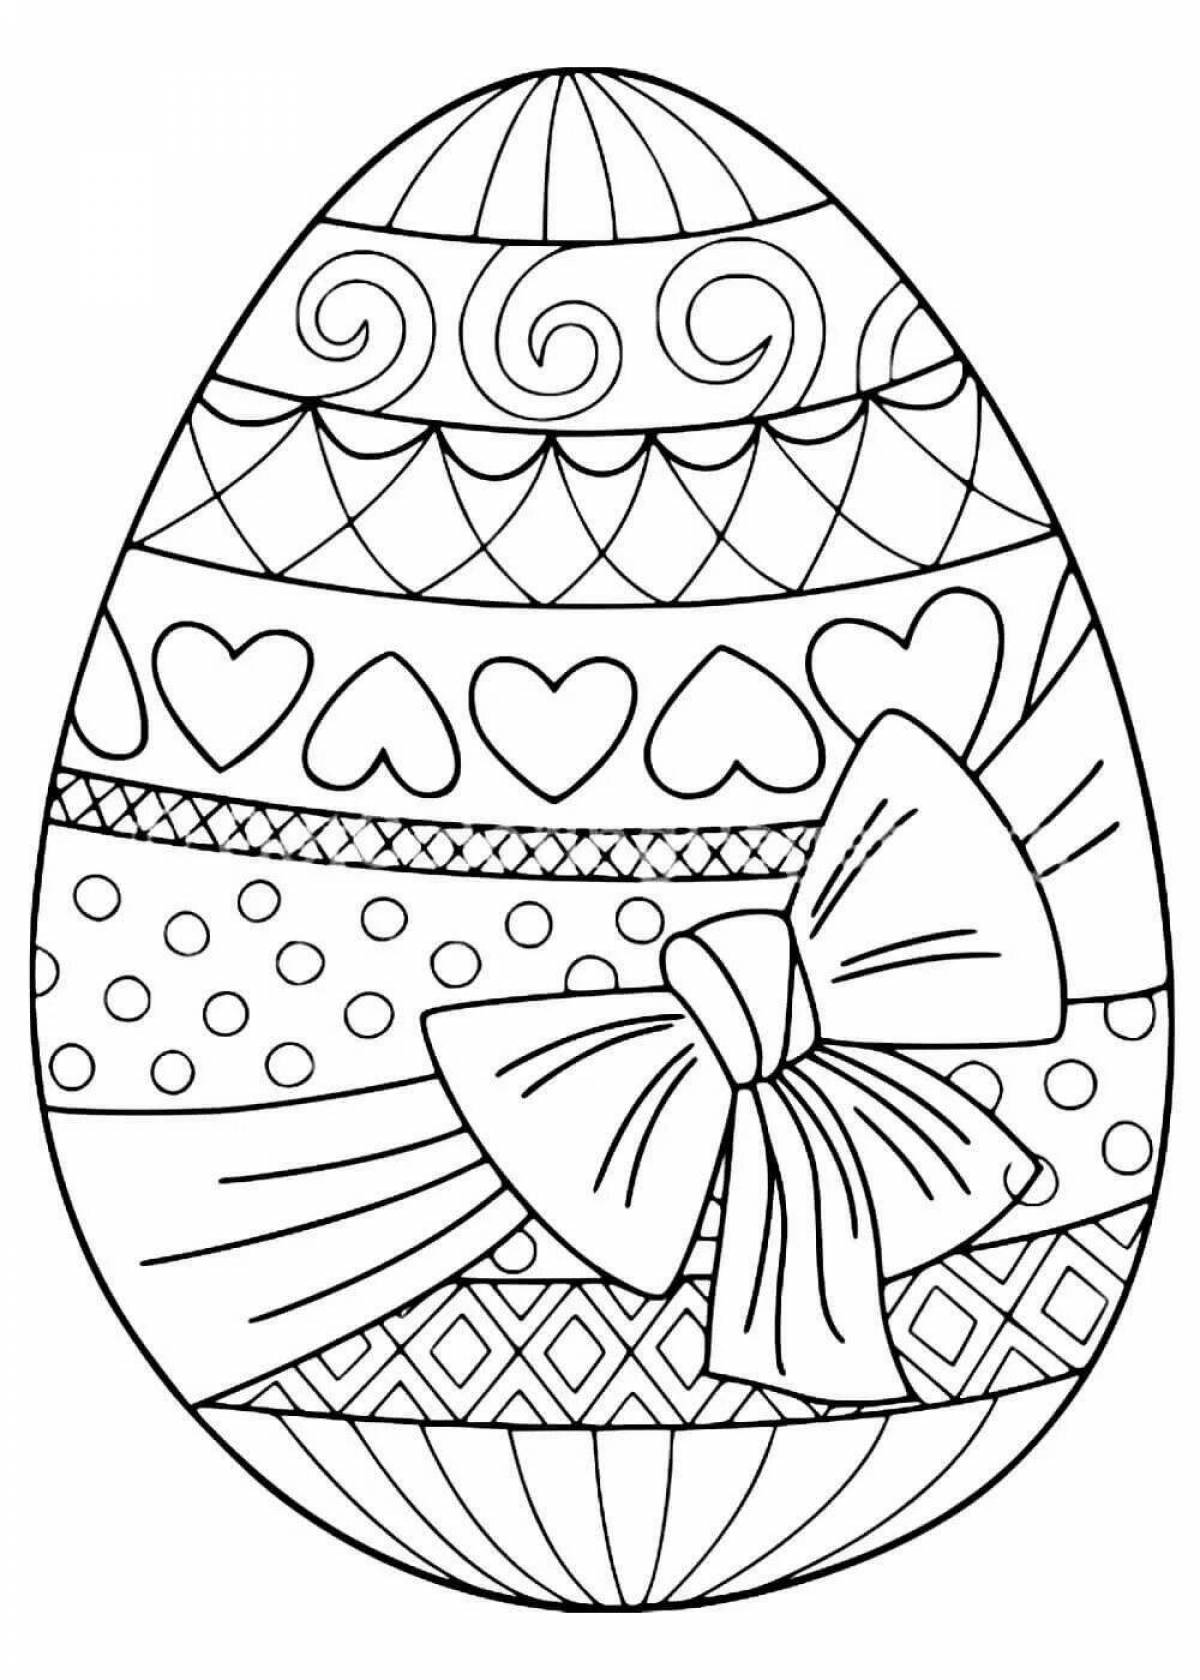 Artistic coloring of easter eggs